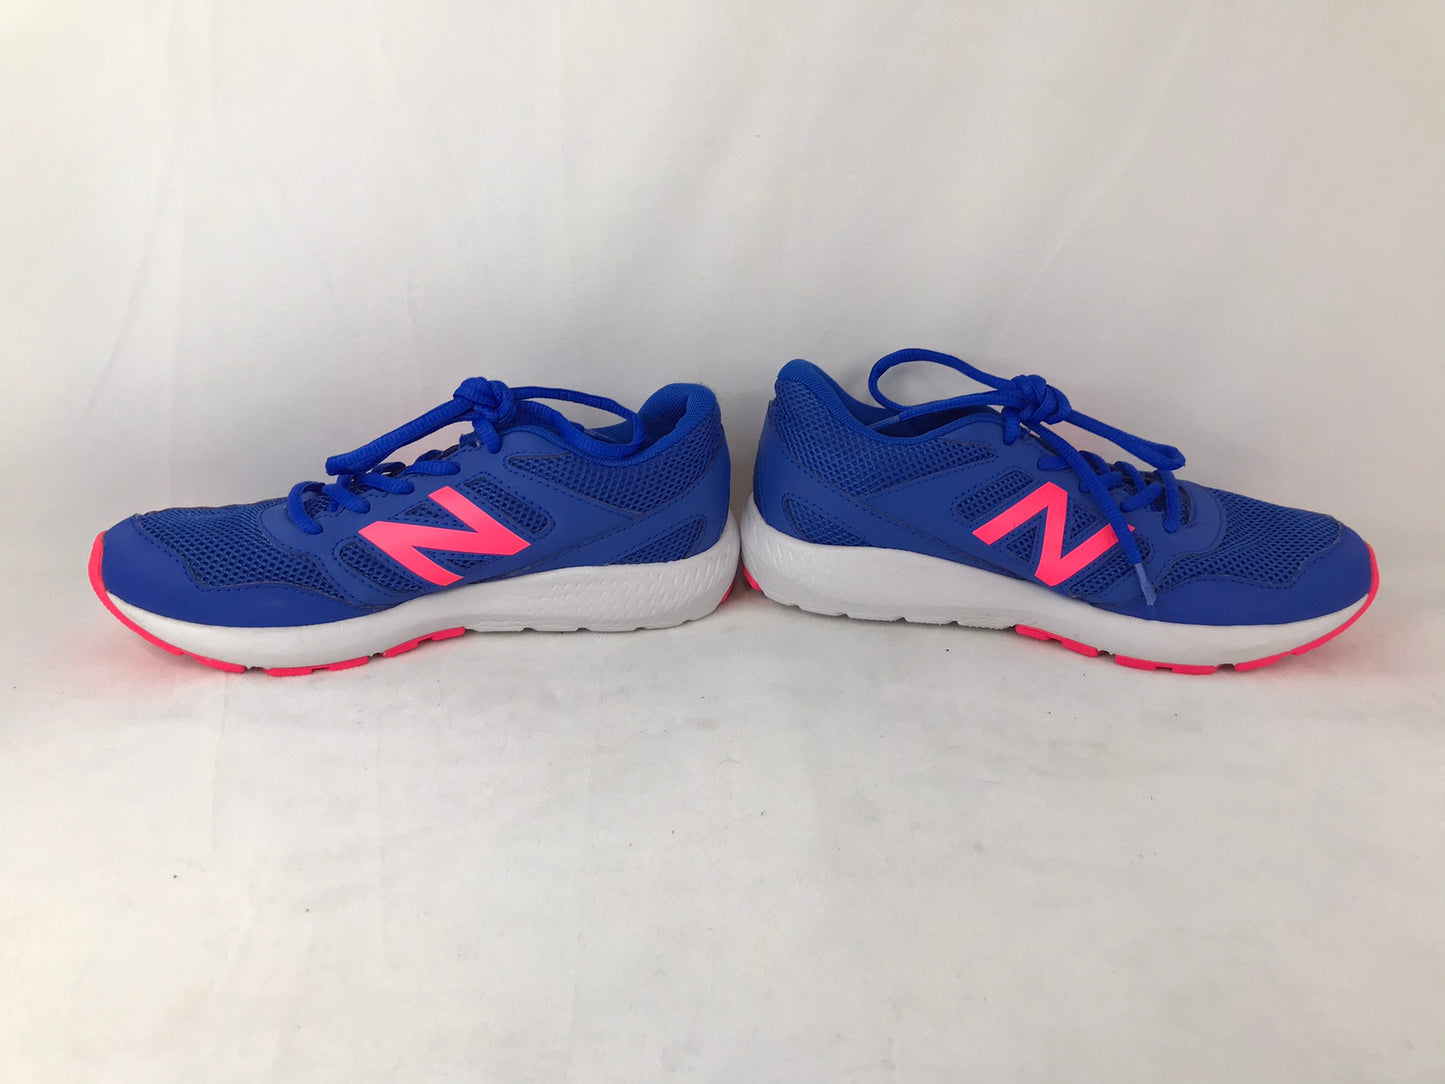 Child Running Shoes Size 4 New Balance Brilliant Blue Pink As New